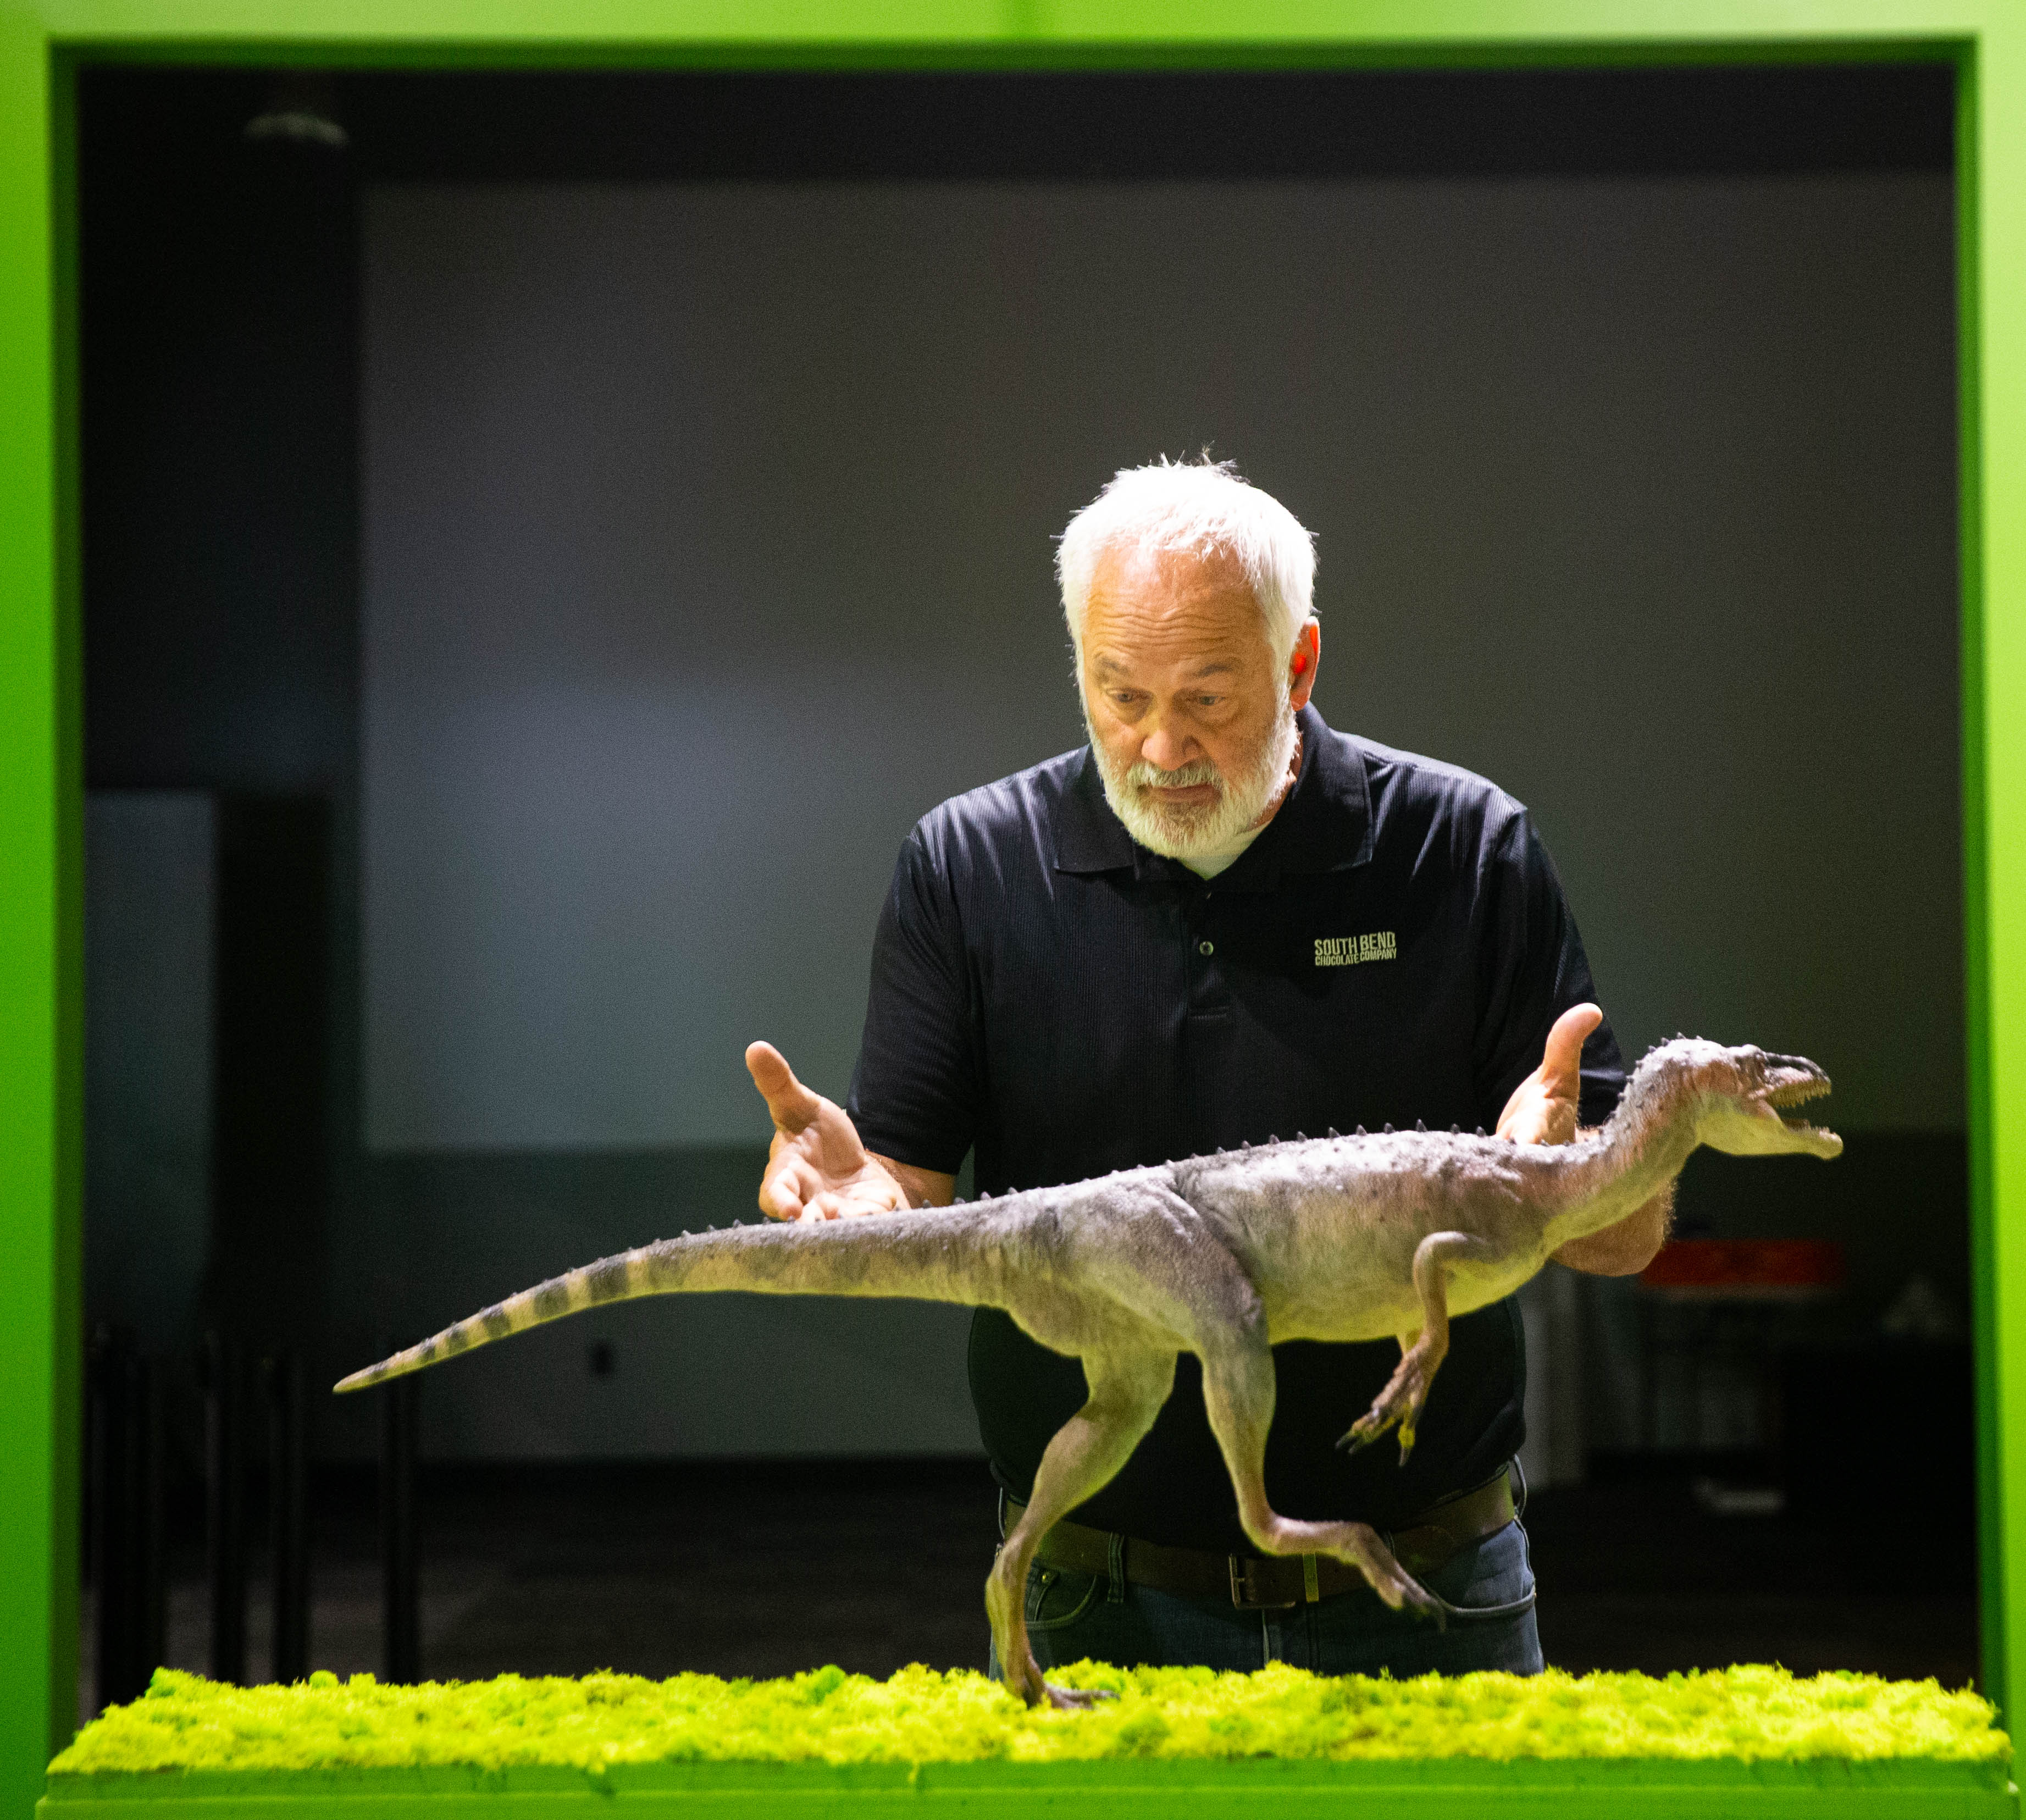 Dinosaurs, chocolate, a pub: Indiana's newest destination. Get an exclusive look today.